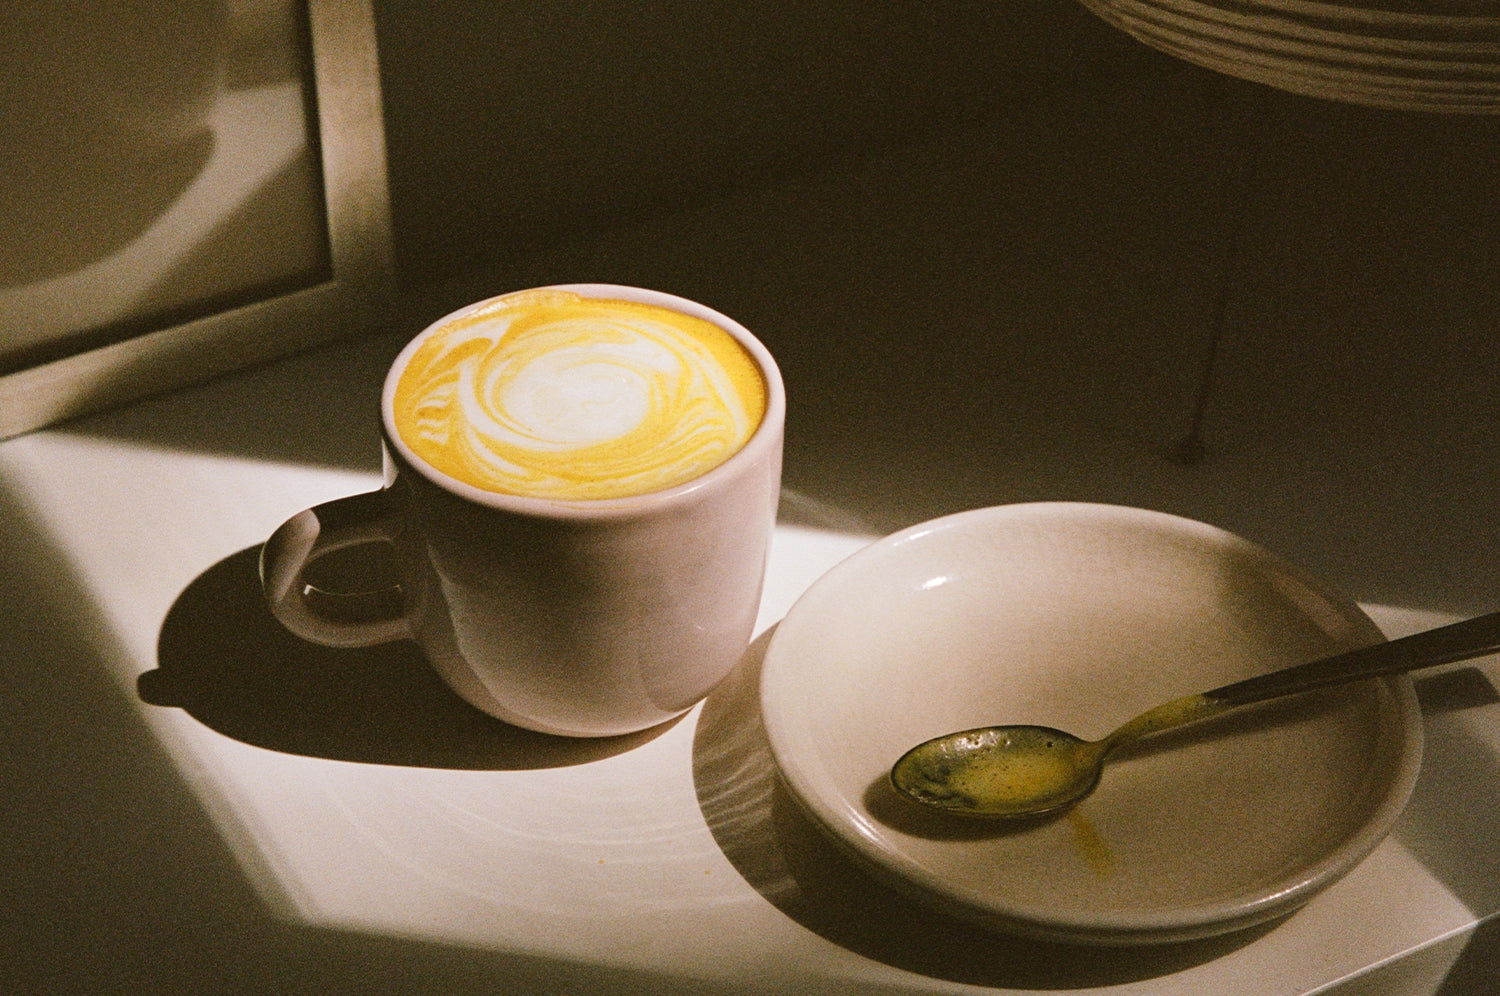 A cup of THE FULLEST Warm Feelings saffron latte in a patch of sunlight.